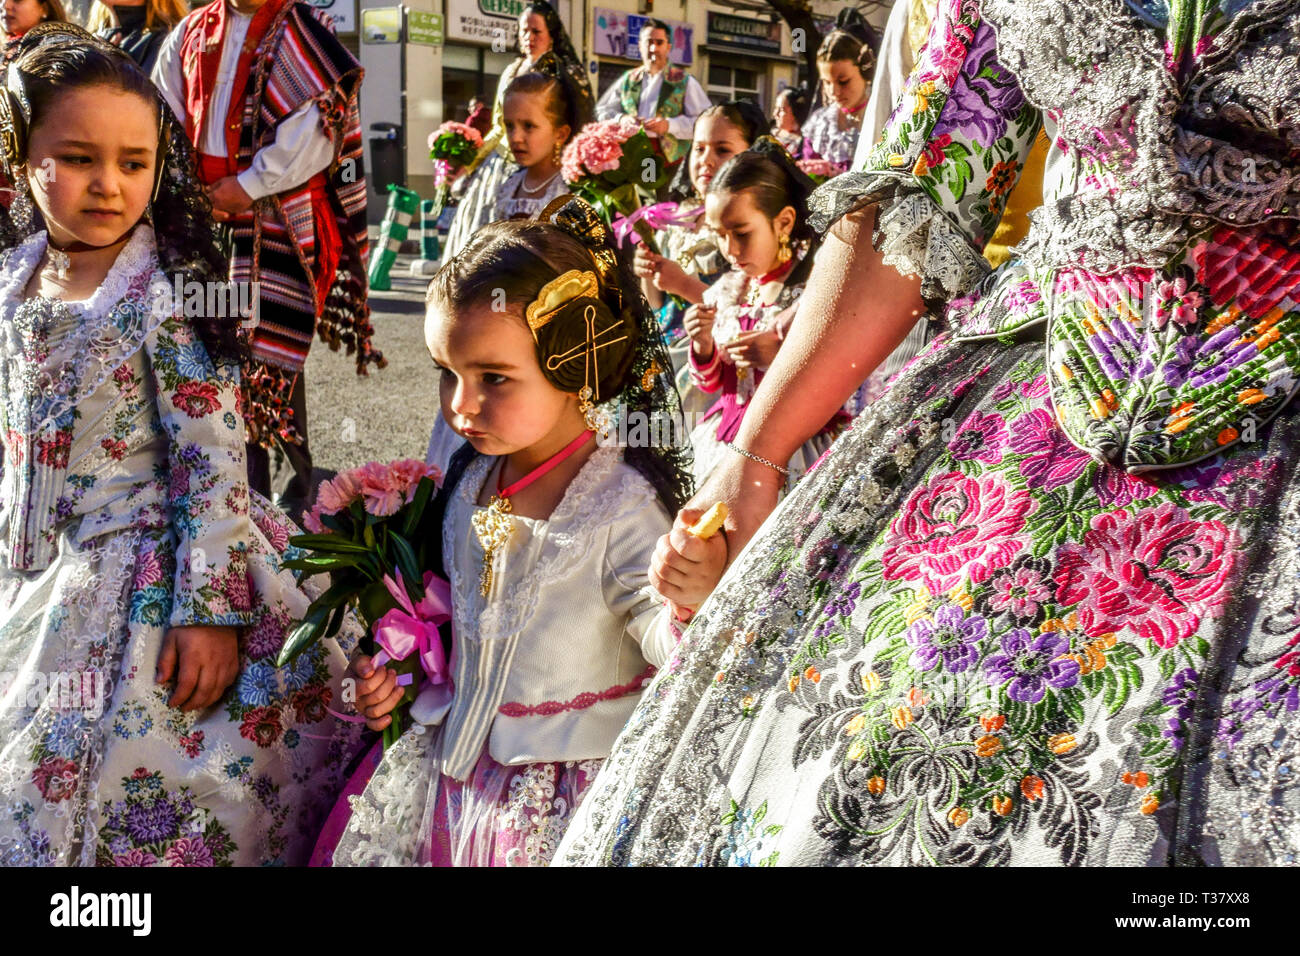 Fallas festival Valencia, People, Kids, Children girls dressed in traditional dress colorful costumes marching to Virgen, Spain Europe Las Fallas Stock Photo